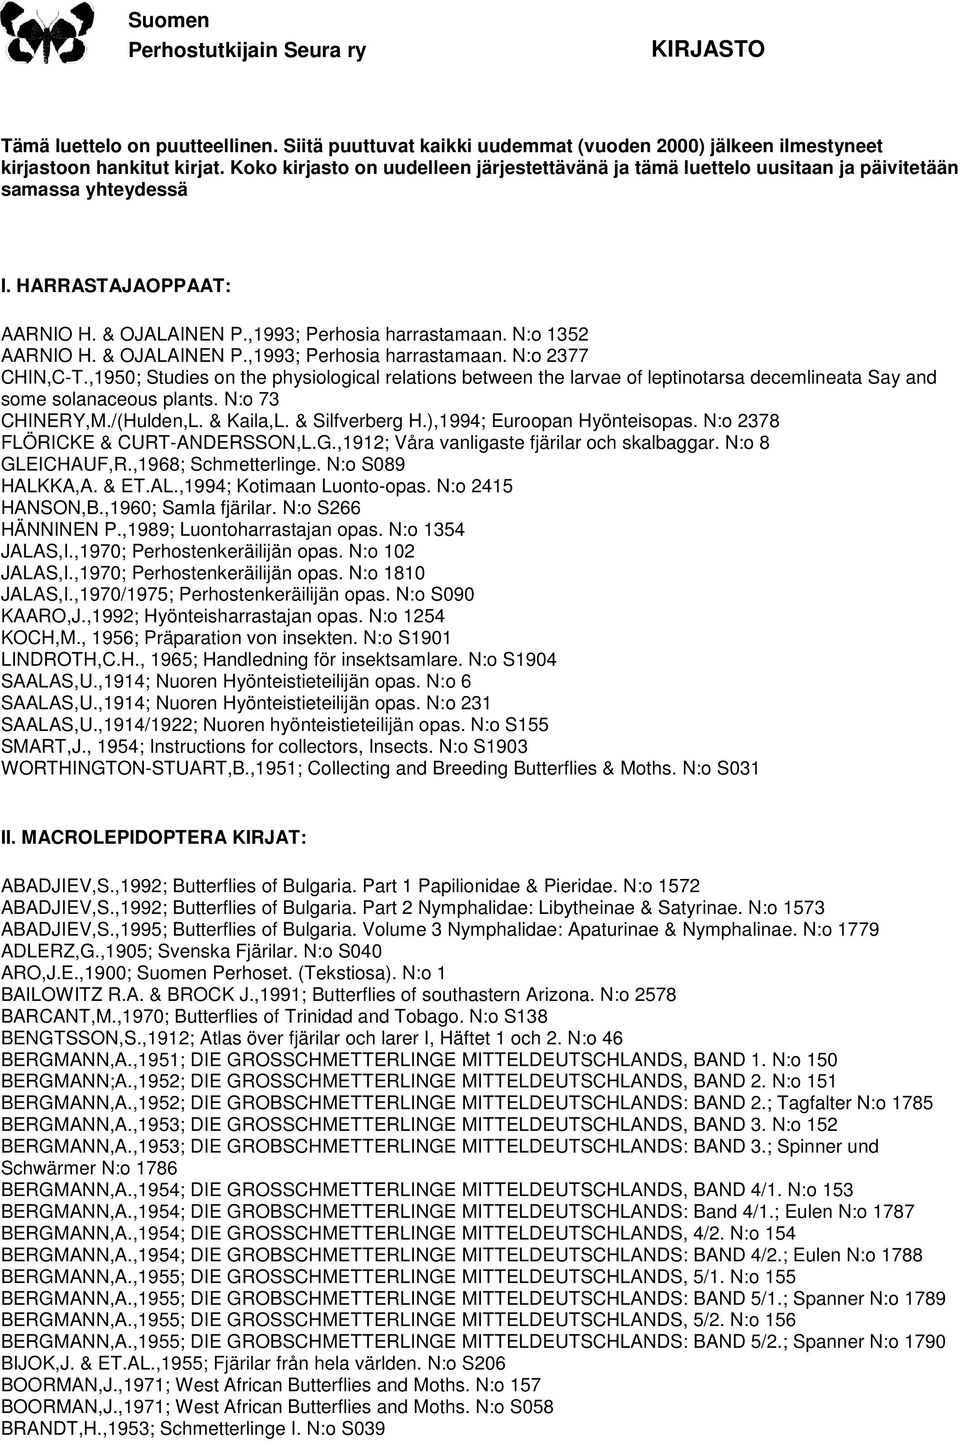 & OJALAINEN P.,1993; Perhosia harrastamaan. N:o 2377 CHIN,C-T.,1950; Studies on the physiological relations between the larvae of leptinotarsa decemlineata Say and some solanaceous plants.